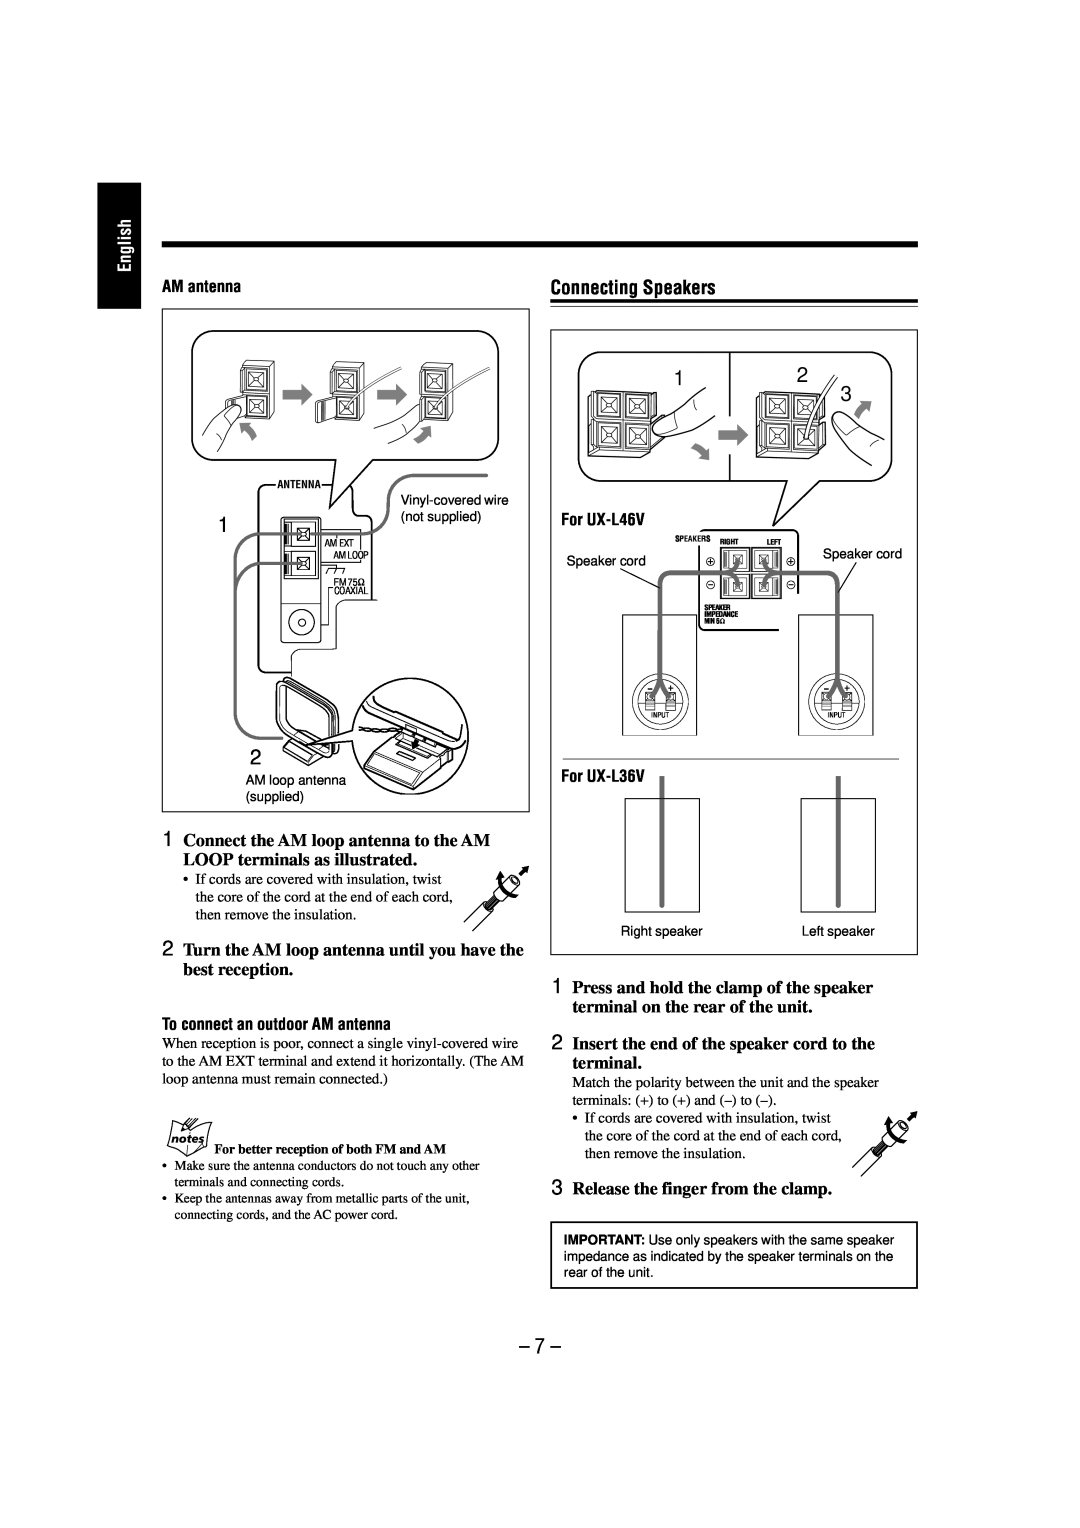 JVC UX-L46V manual Connecting Speakers, 1Connect the AM loop antenna to the AM, LOOP terminals as illustrated, AM antenna 